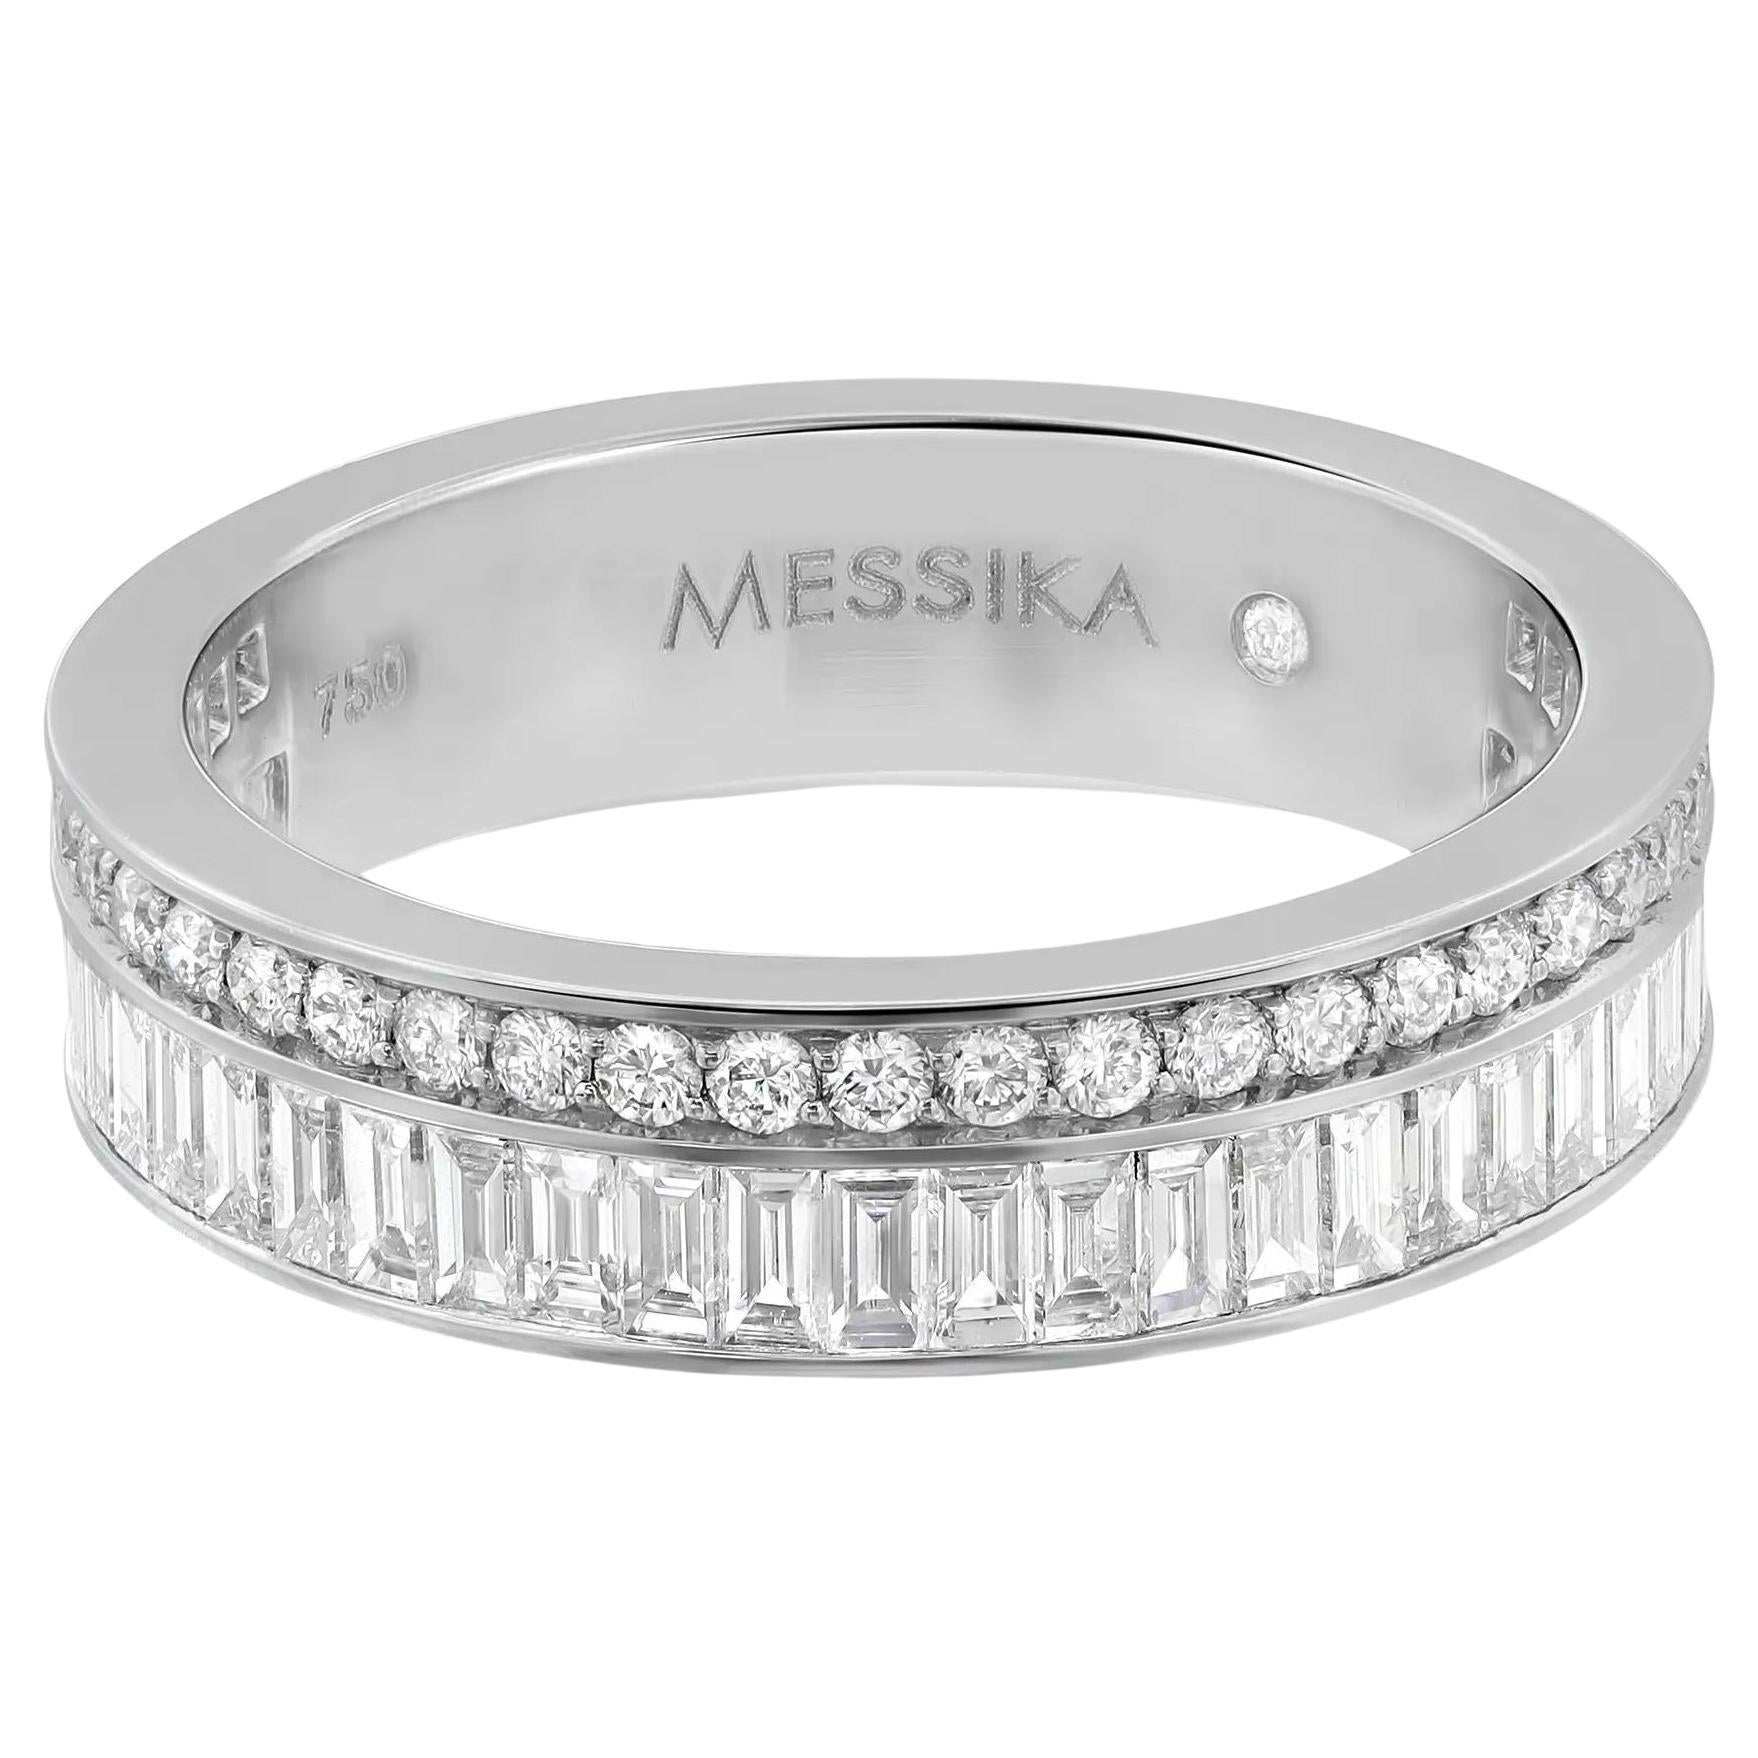 Messika 1.15Cttw Liz Baguette And Round Cut Diamond Ring 18K White Gold Size 6.5